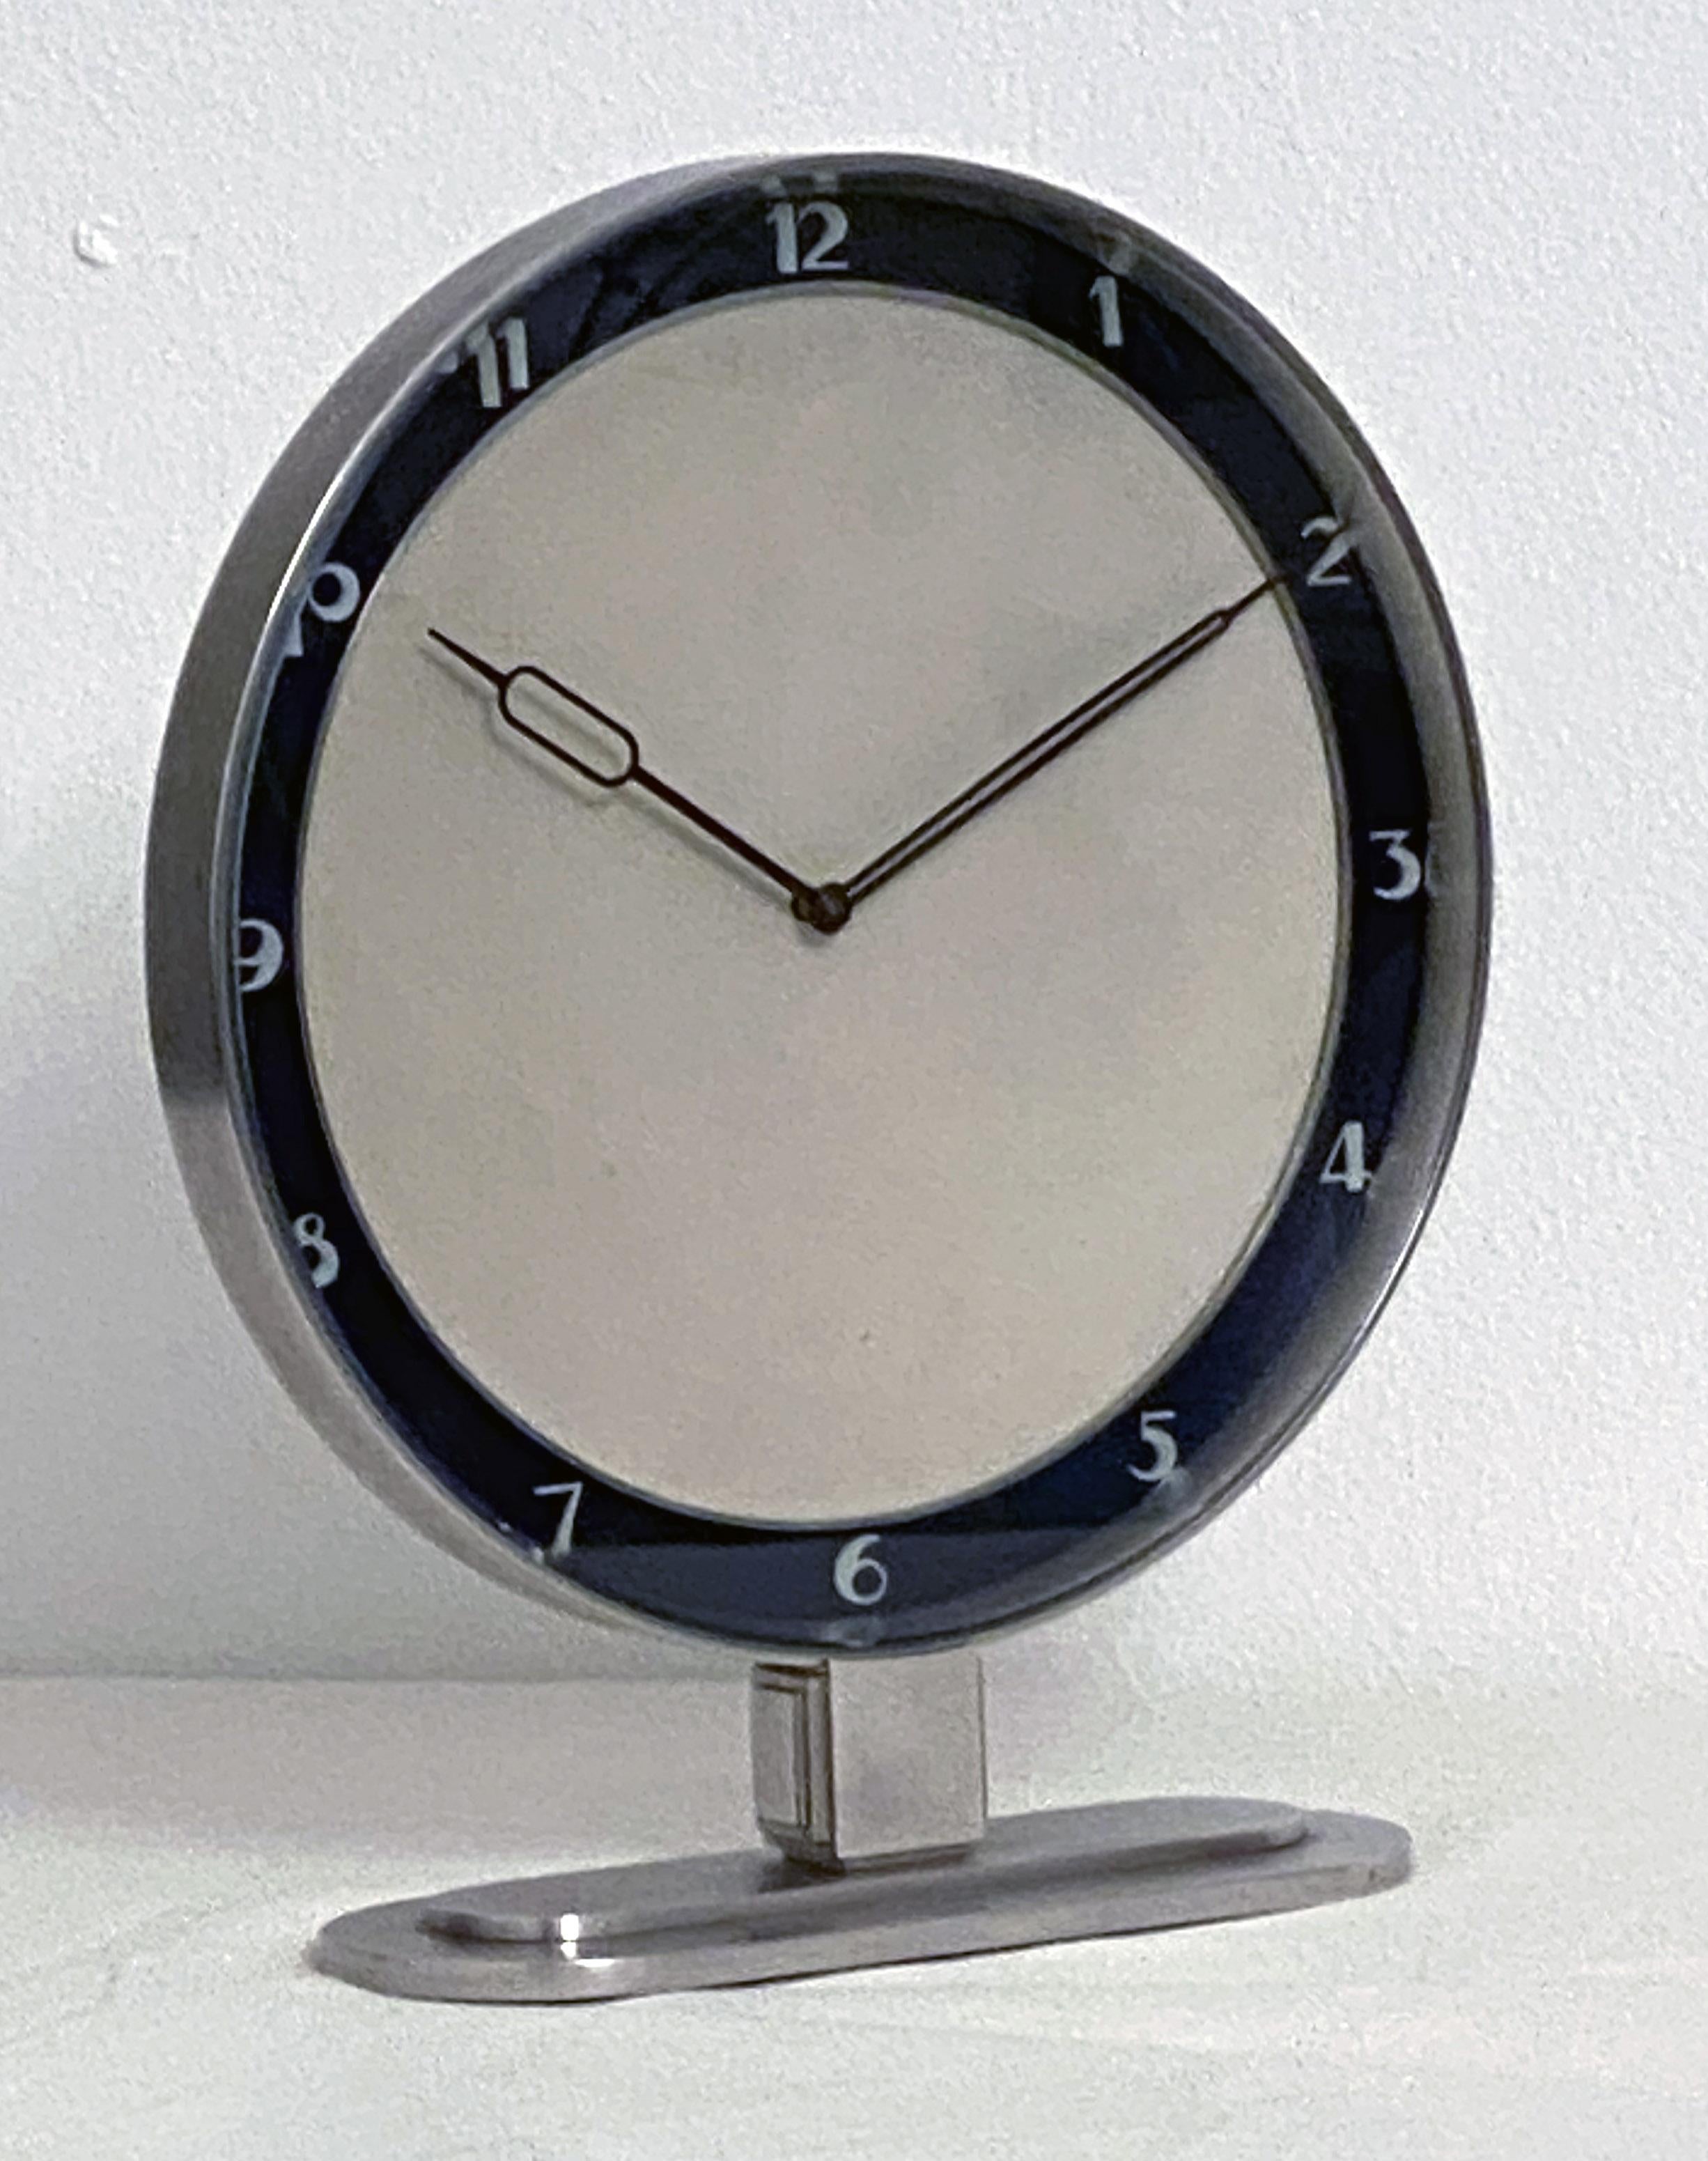 Original mechanical movement was replaced to a modern quartz movement with a battery.
The clock is in perfect condition, no major scratches, no glass scratched.
Glass cover.
Measures: 21 x 17 x 5 cm.